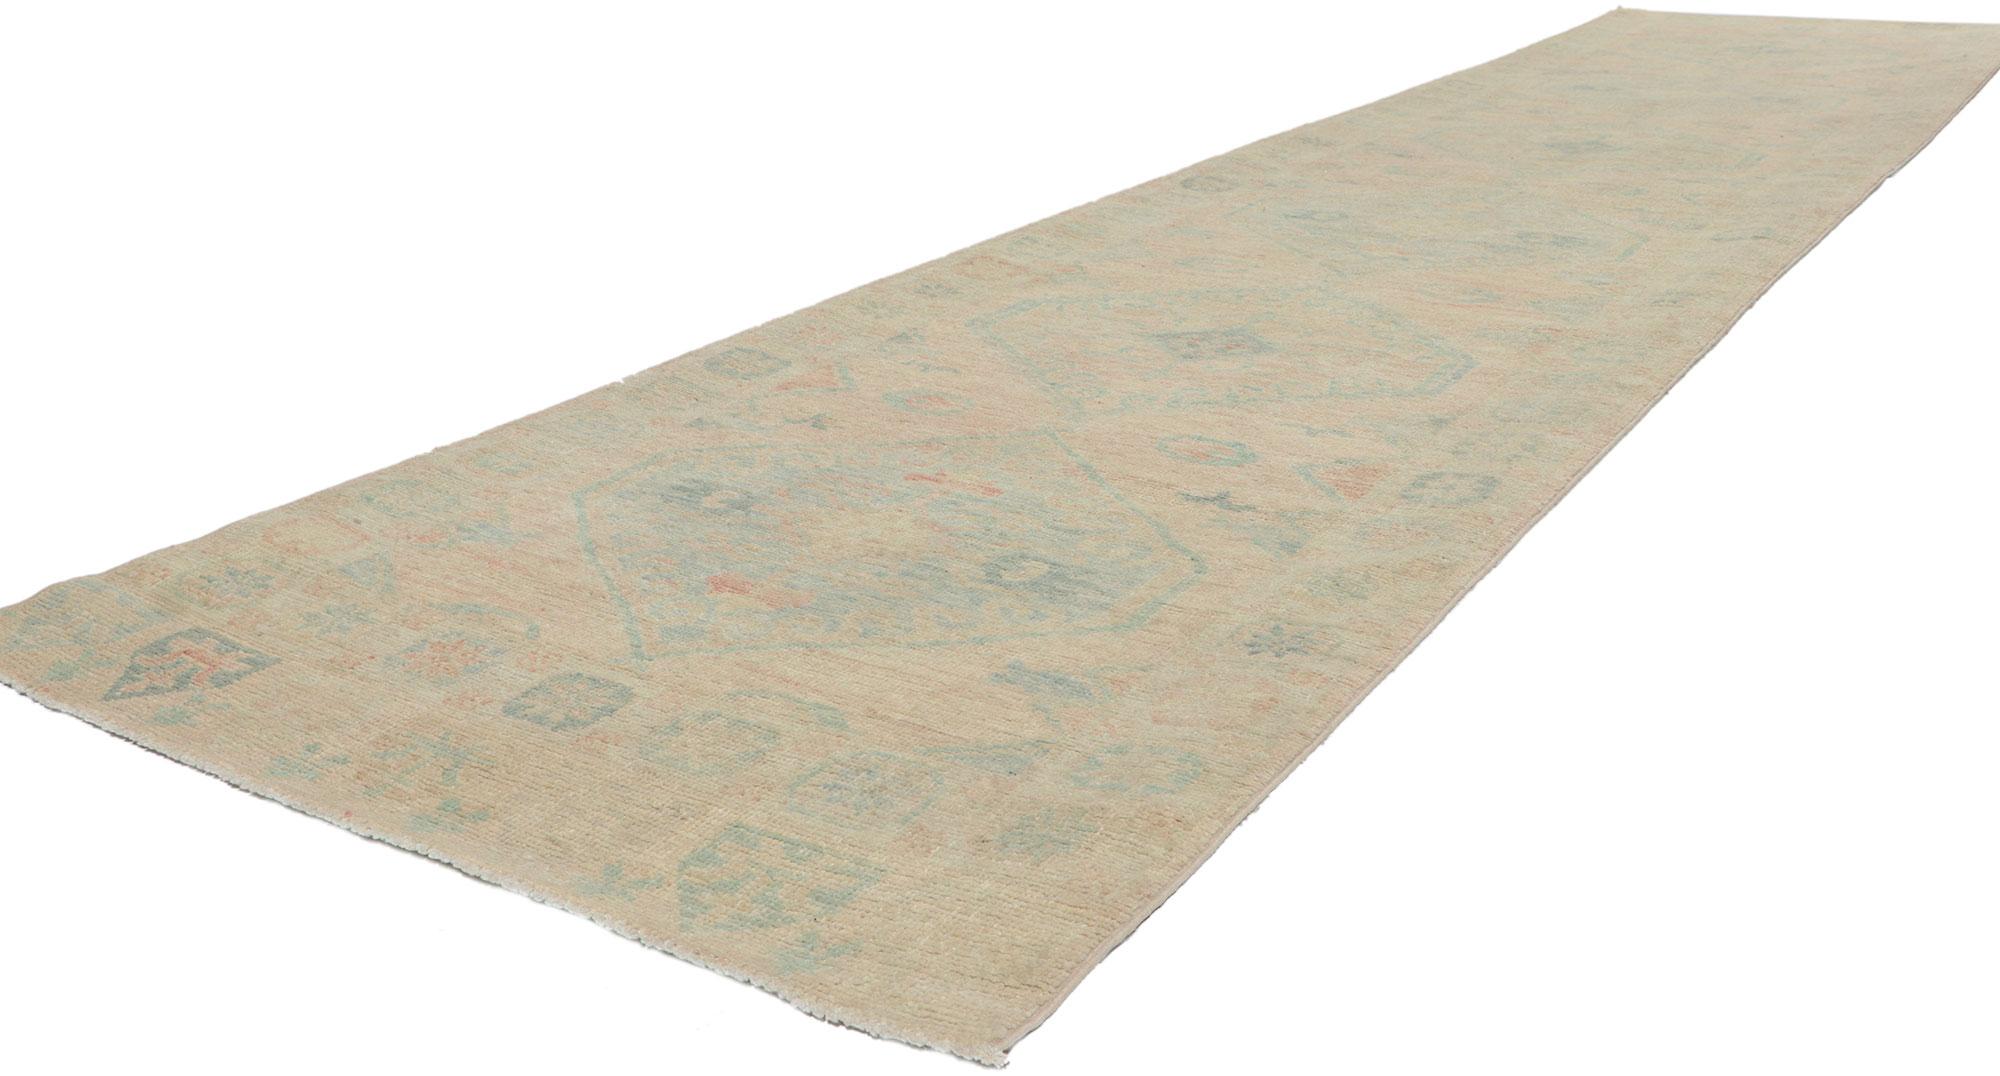 80880 Contemporary Oushak Runner, 03'01 x 14'02. Polished and playful, this hand-knotted wool contemporary Contemporary Oushak runner beautifully embodies a modern style. With elements of comfort, modern style and functional versatility, this Oushak